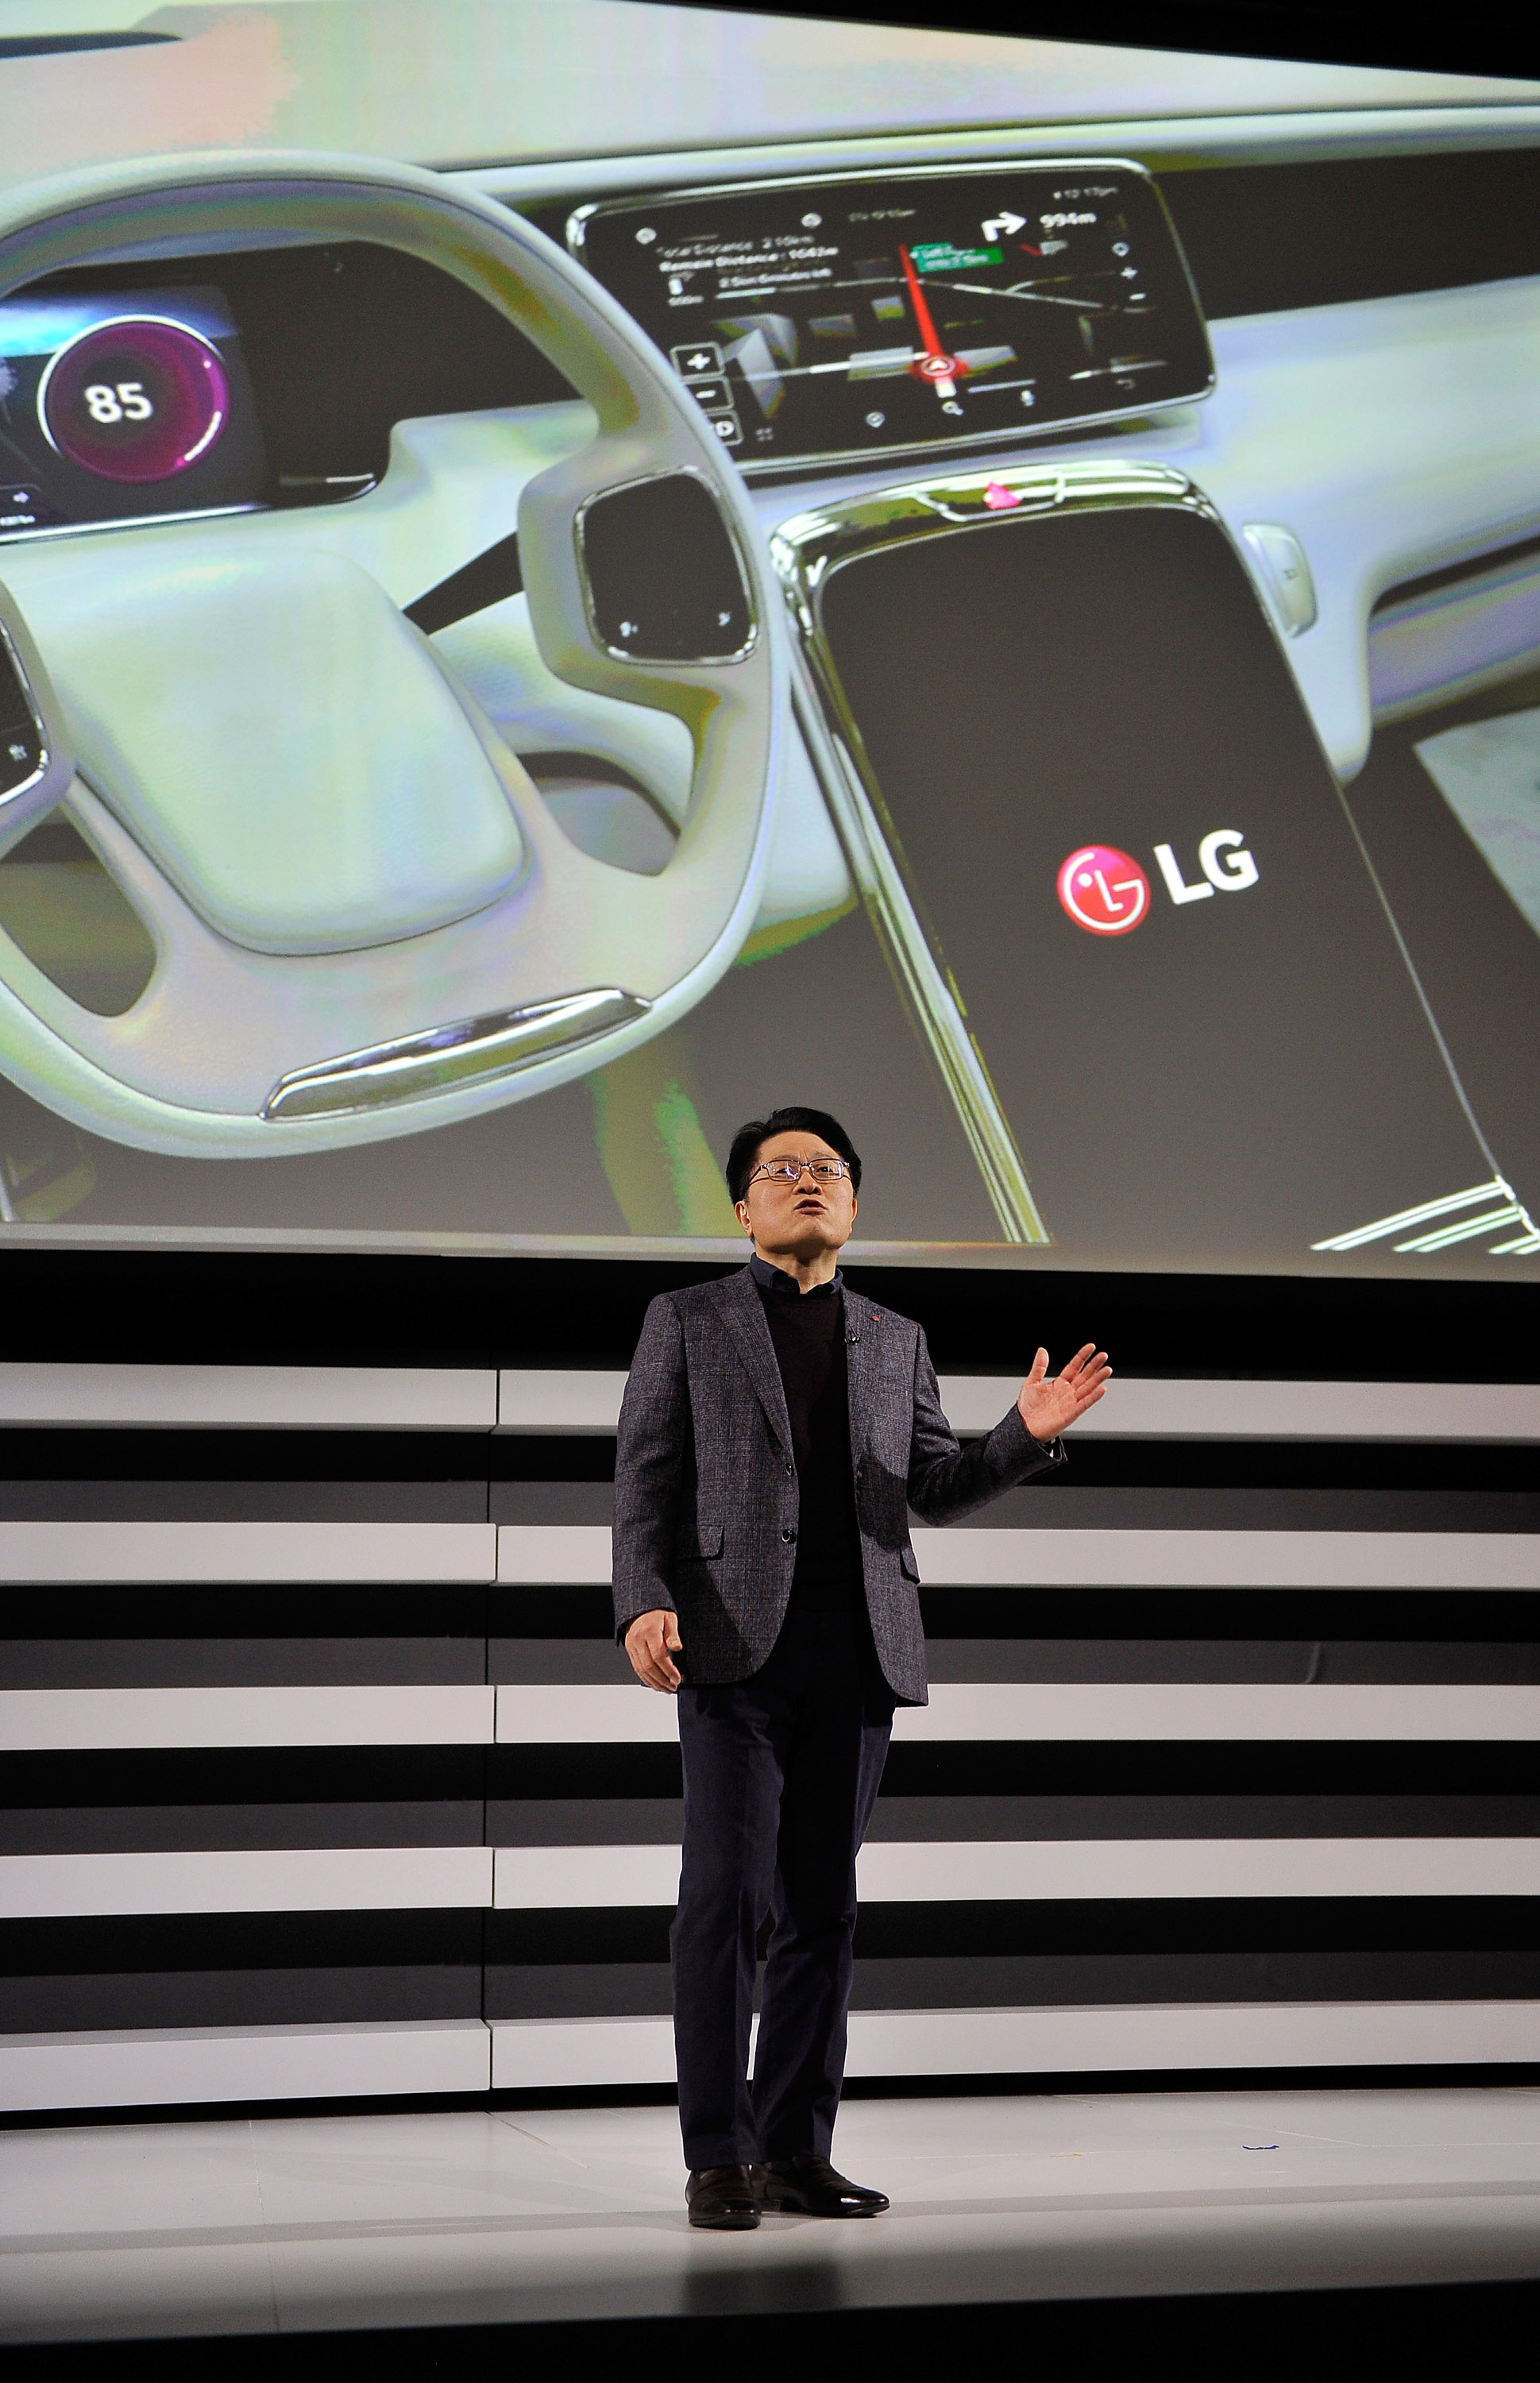 LG Electronics President and Chief Technology Officer Skott Ahn speaks at the 2015 International Consumer Electronics Show in Las Vegas on Jan. 5, 2015. (David Becker—Getty Images)